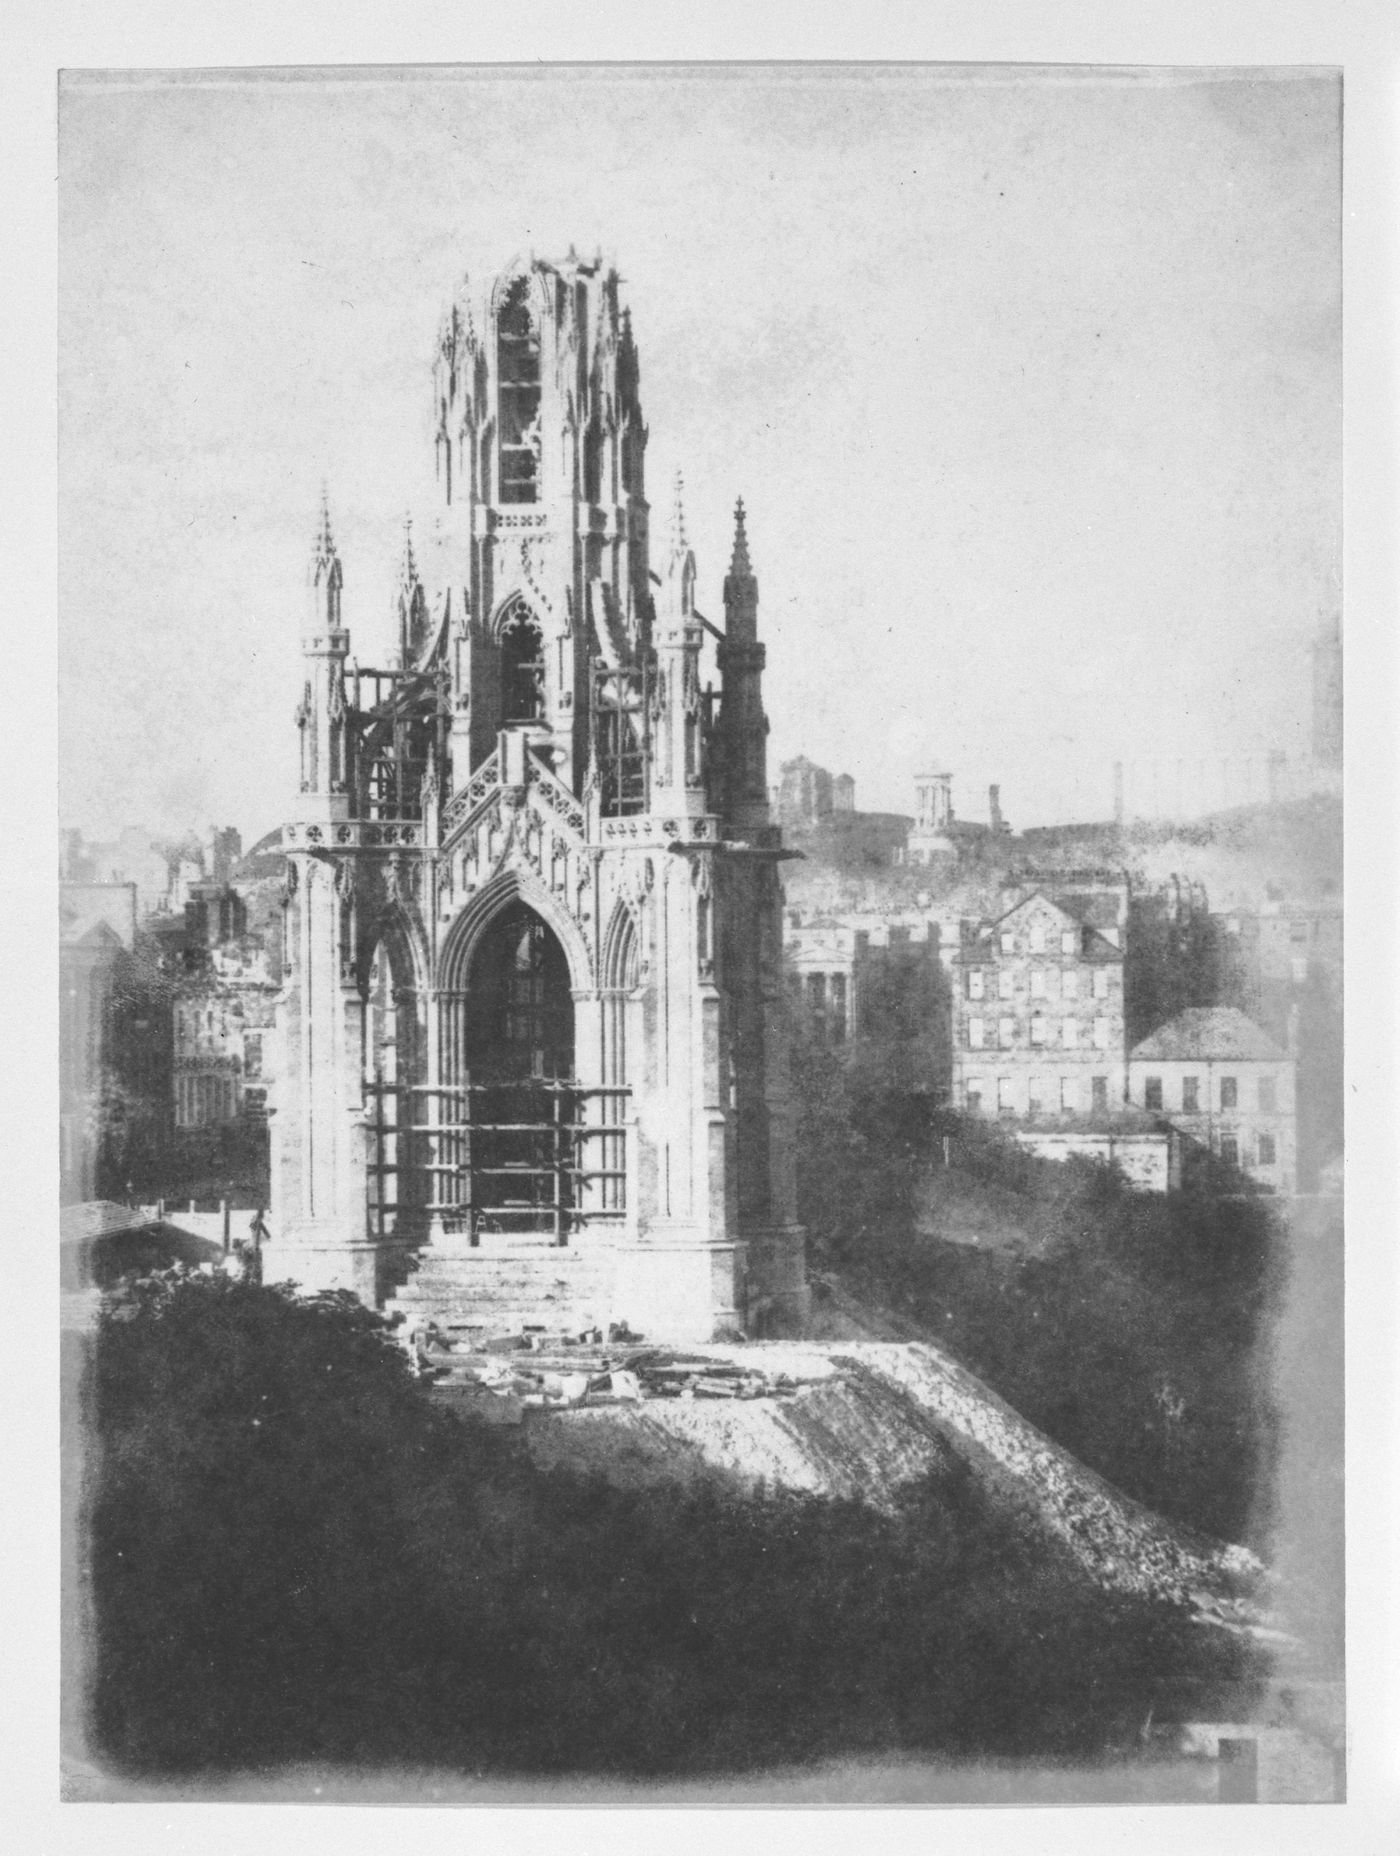 View of the Scot Monument during construction, Edinburgh, Scotland